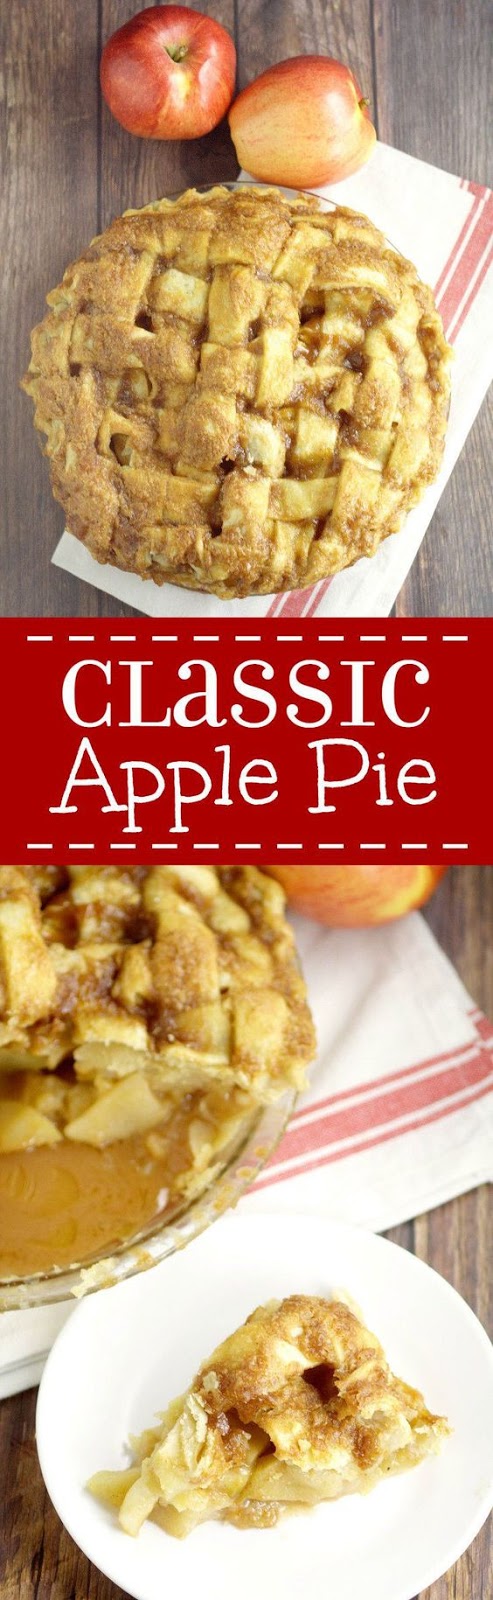 Traditional Apple Pie Recipe - Girls Dishes